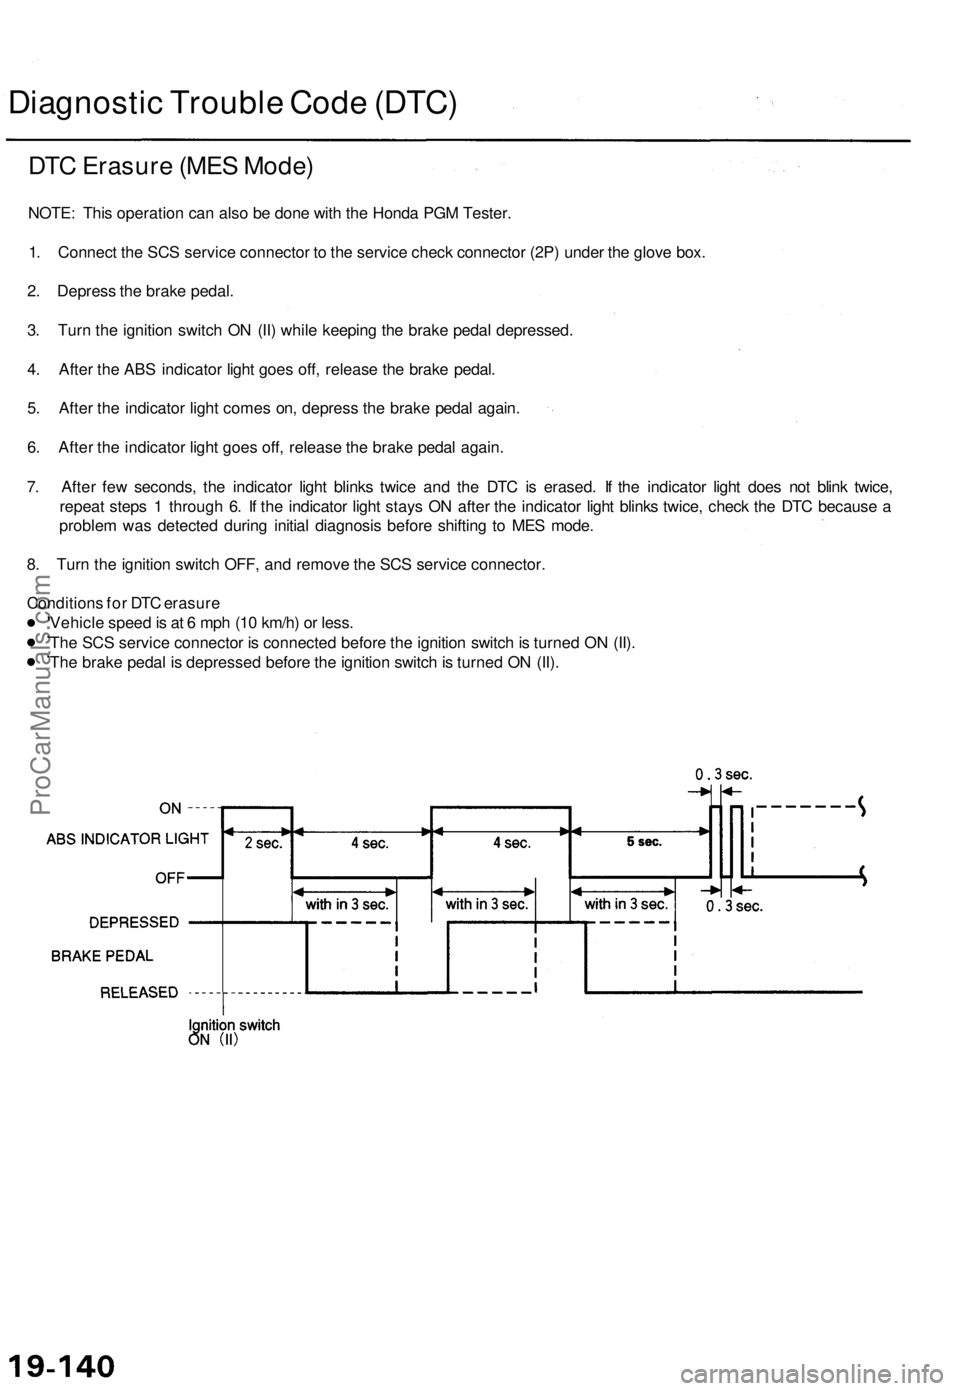 ACURA TL 1995  Service Repair Manual 
Diagnostic Trouble Code (DTC)

DTC Erasure (MES Mode)

NOTE: This operation can also be done with the Honda PGM Tester.

1. Connect the SCS service connector to the service check connector (2P) under